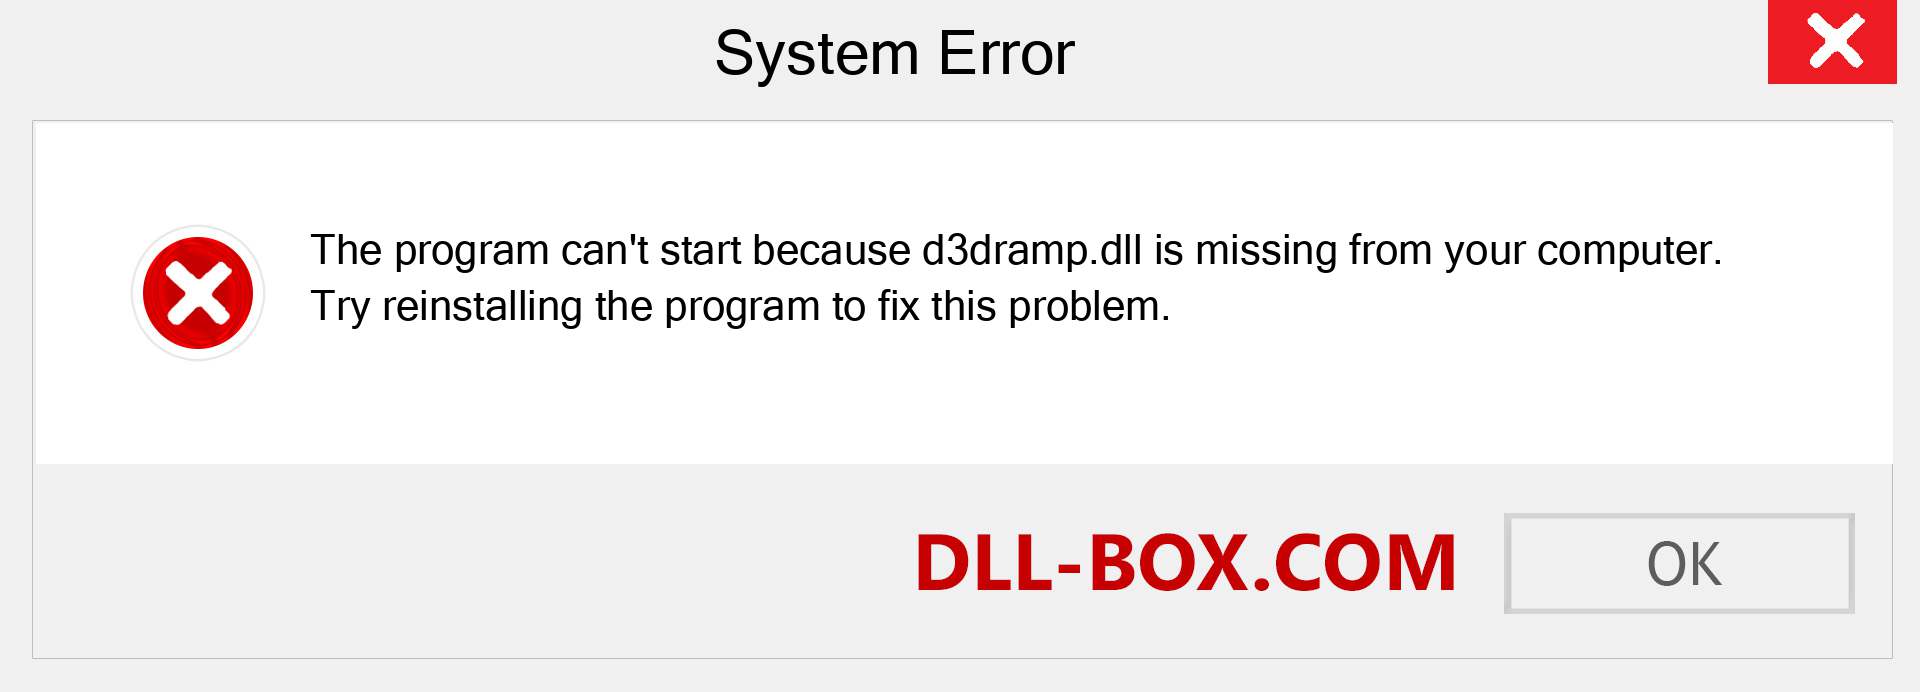  d3dramp.dll file is missing?. Download for Windows 7, 8, 10 - Fix  d3dramp dll Missing Error on Windows, photos, images